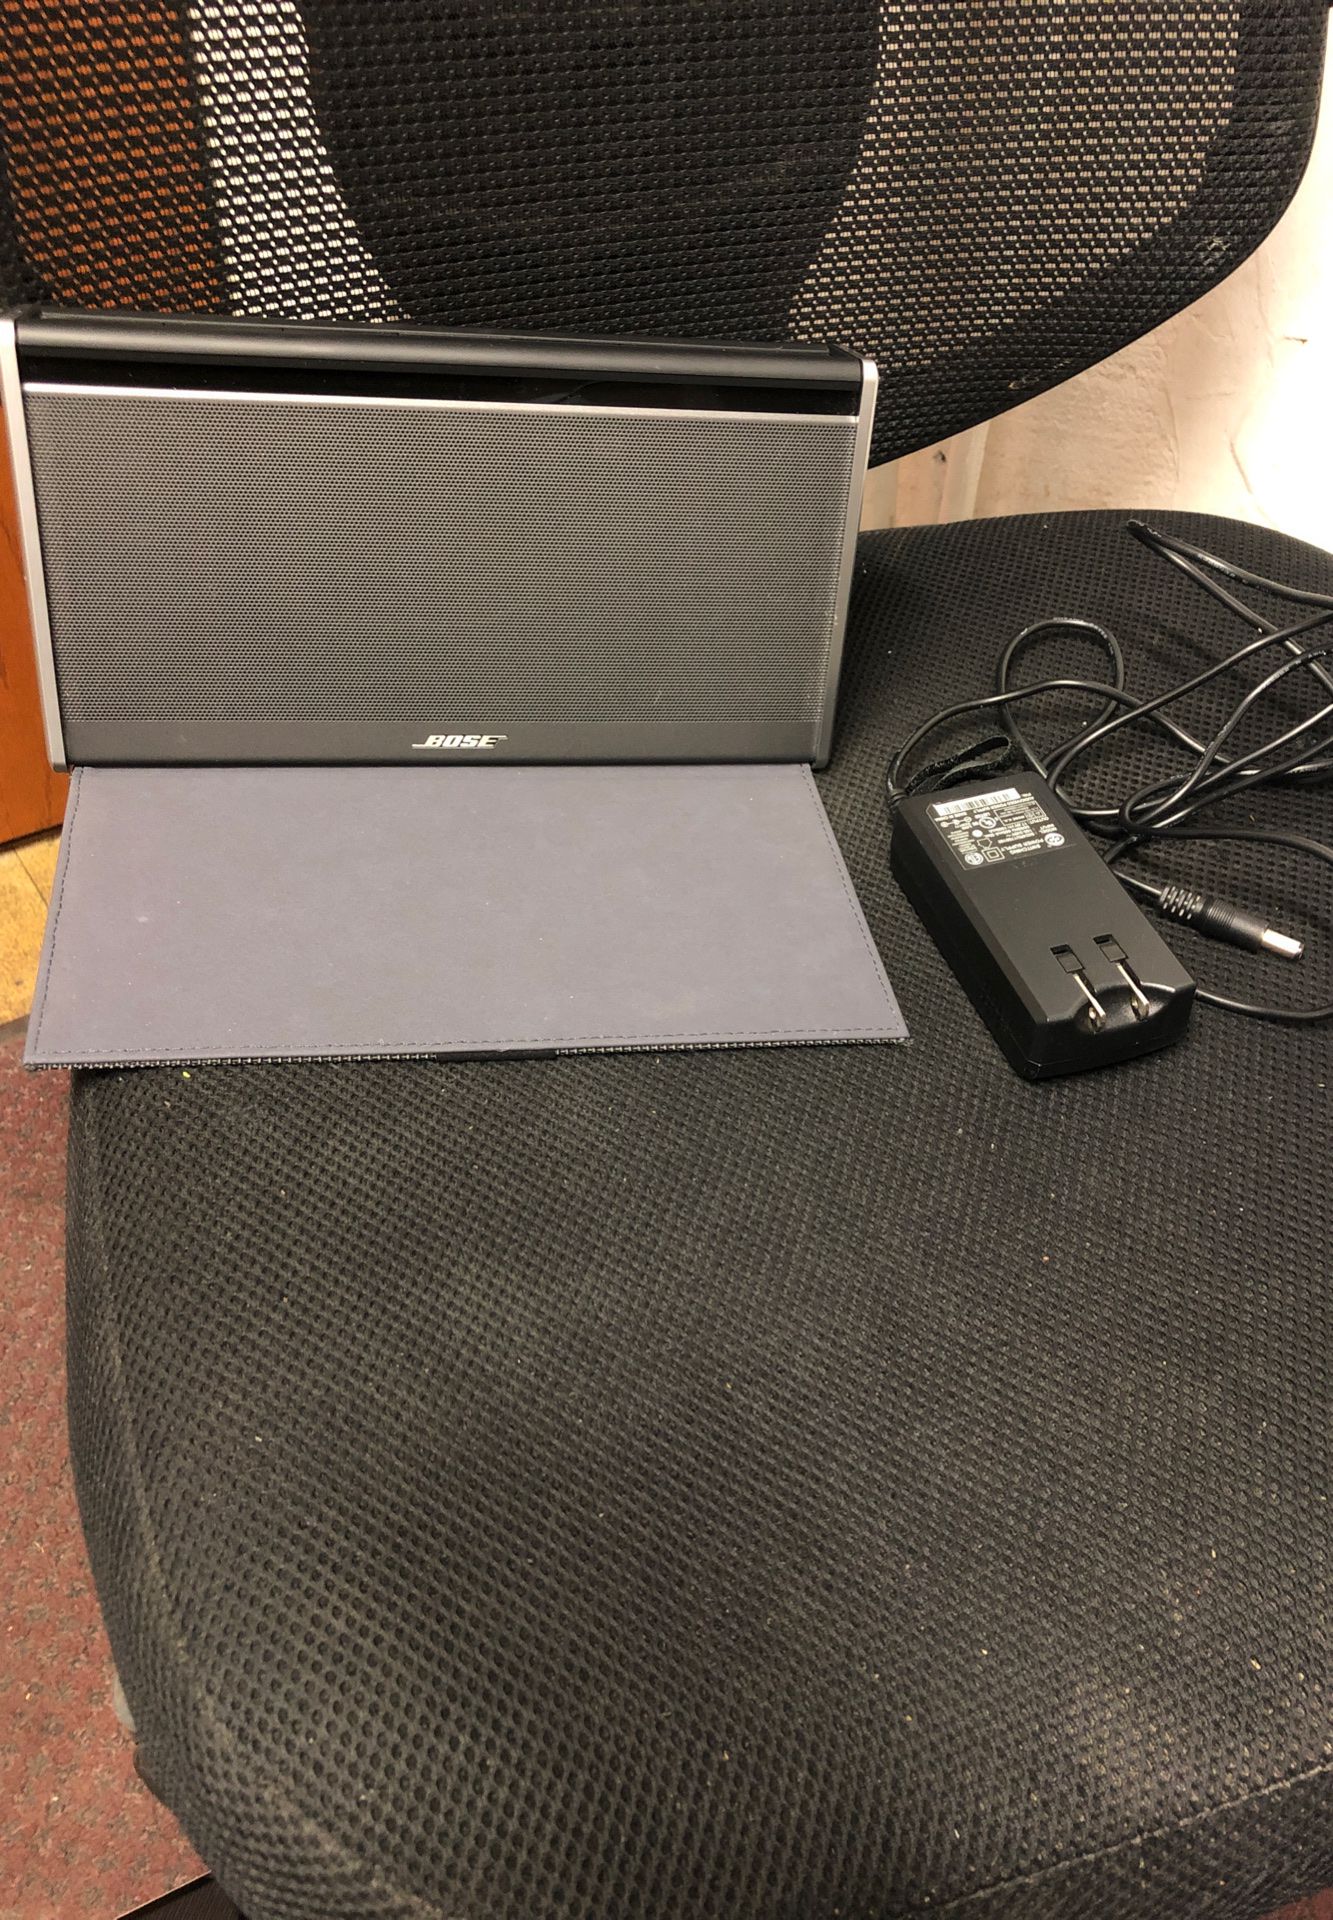 Bose Soundlink 111 with protective cover